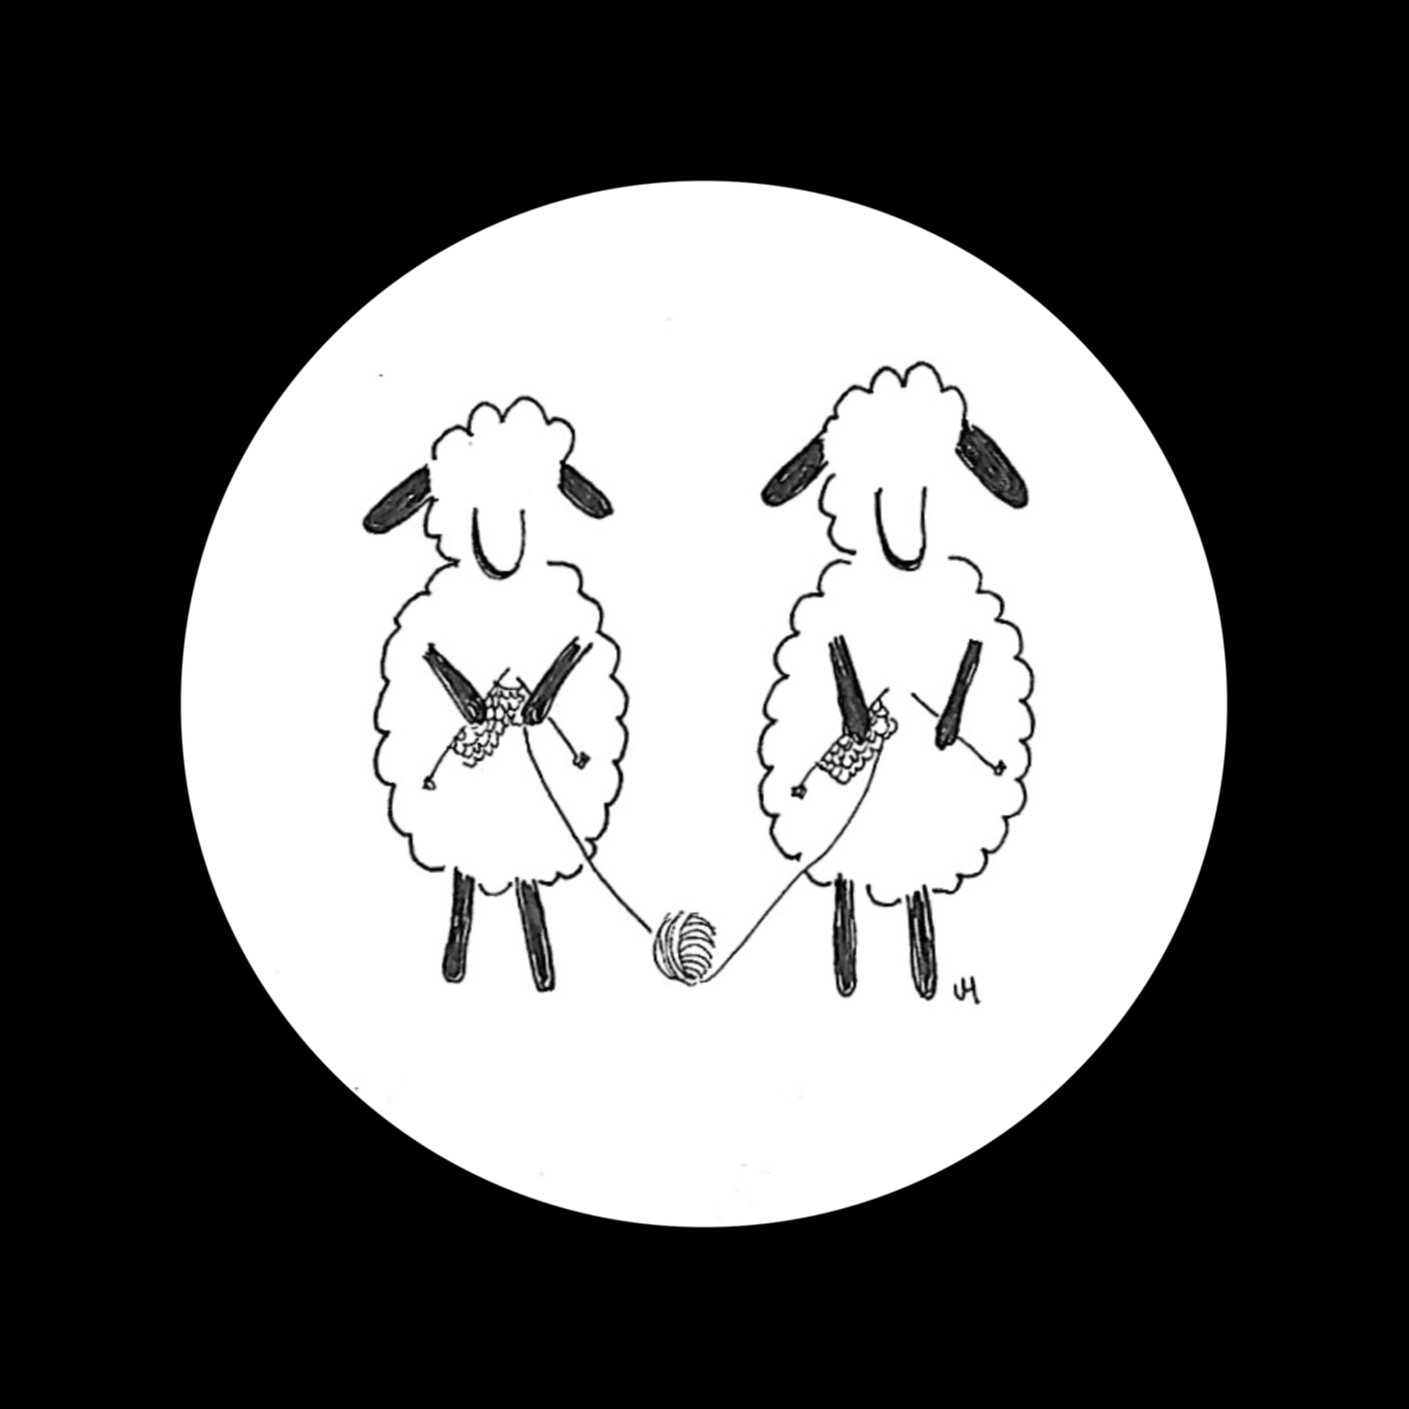 We are Two Sheep